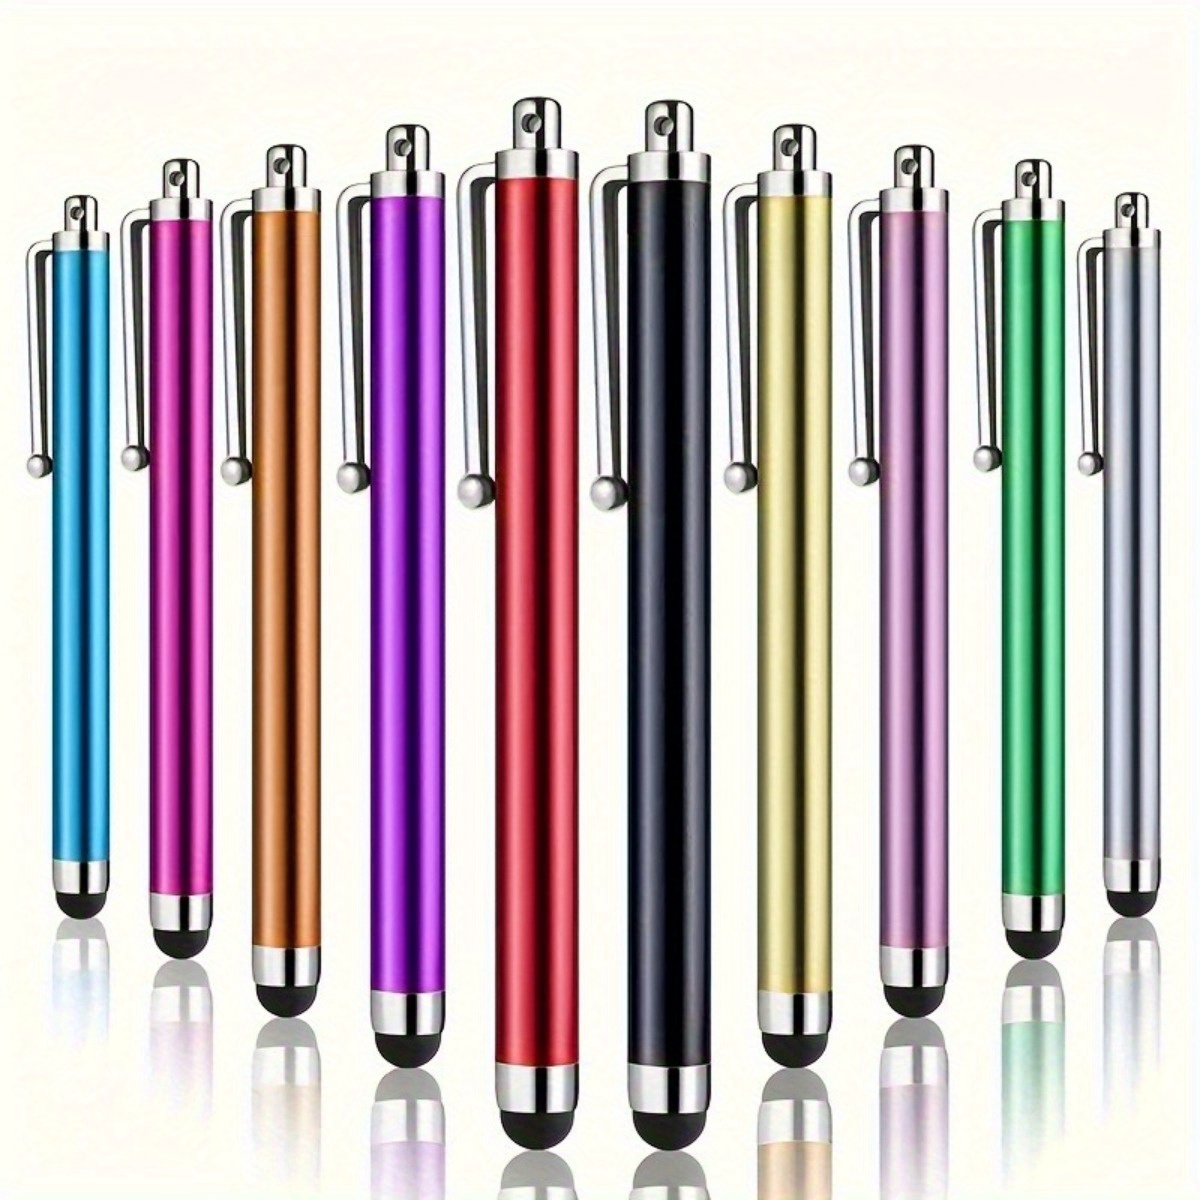 

10pcs High Precision Universal Stylus Pens For Touch Screens, Compatible With Ipad Air 2, For /samsung Galaxy, And Other Capacitive Devices - No Battery Or Electronics Required